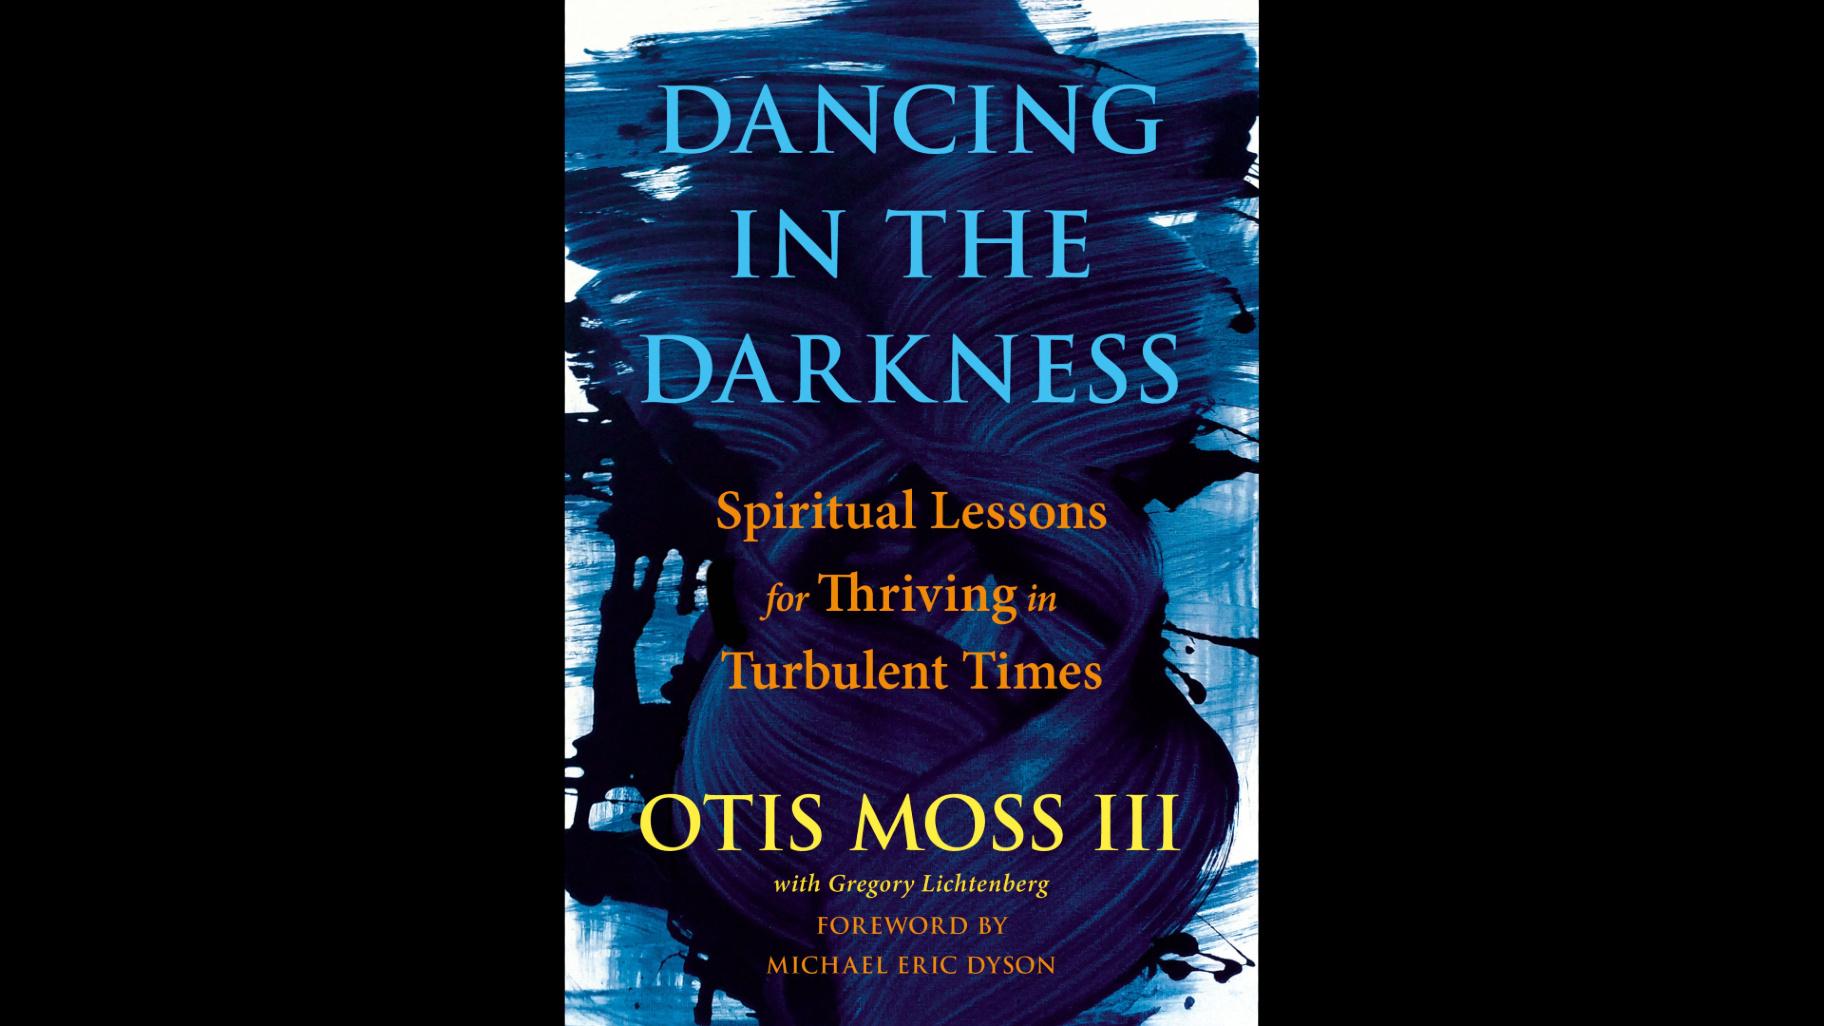 "Dancing in the Darkness: Spiritual Lessons for Thriving in Turbulent Times" by Otis Moss III with Gregory Lichtenberg